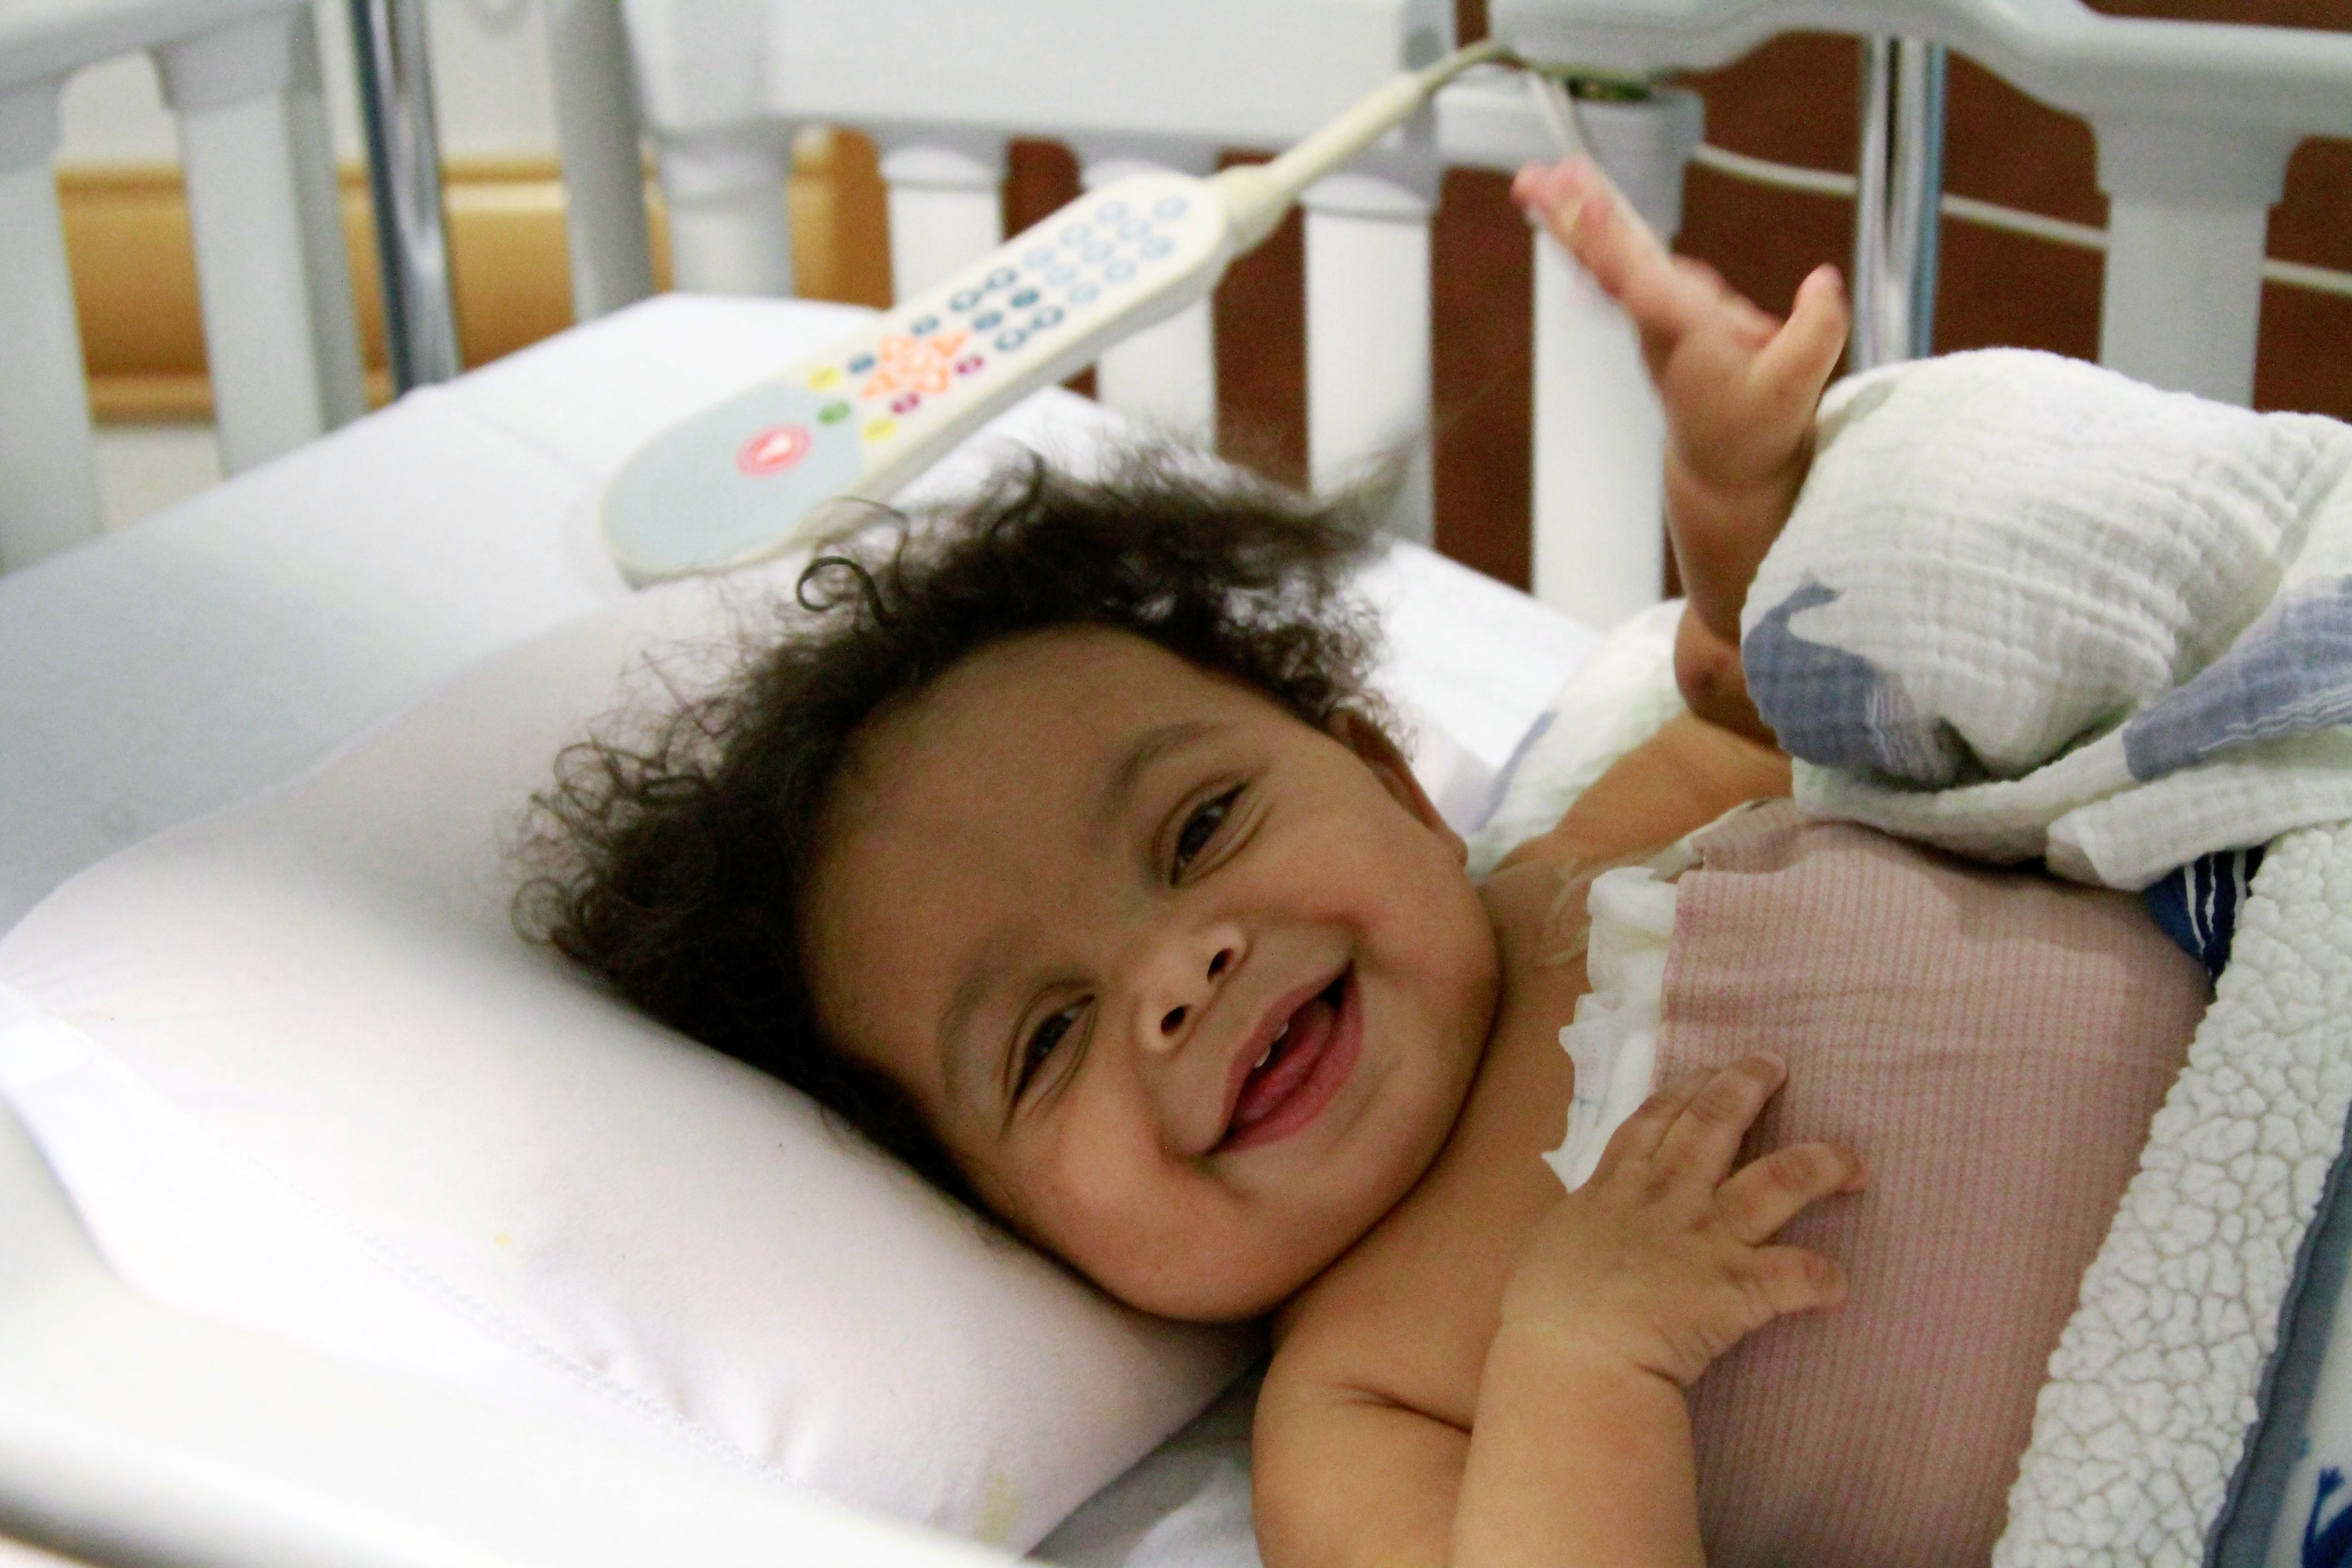 Baby in hospital bed smiling